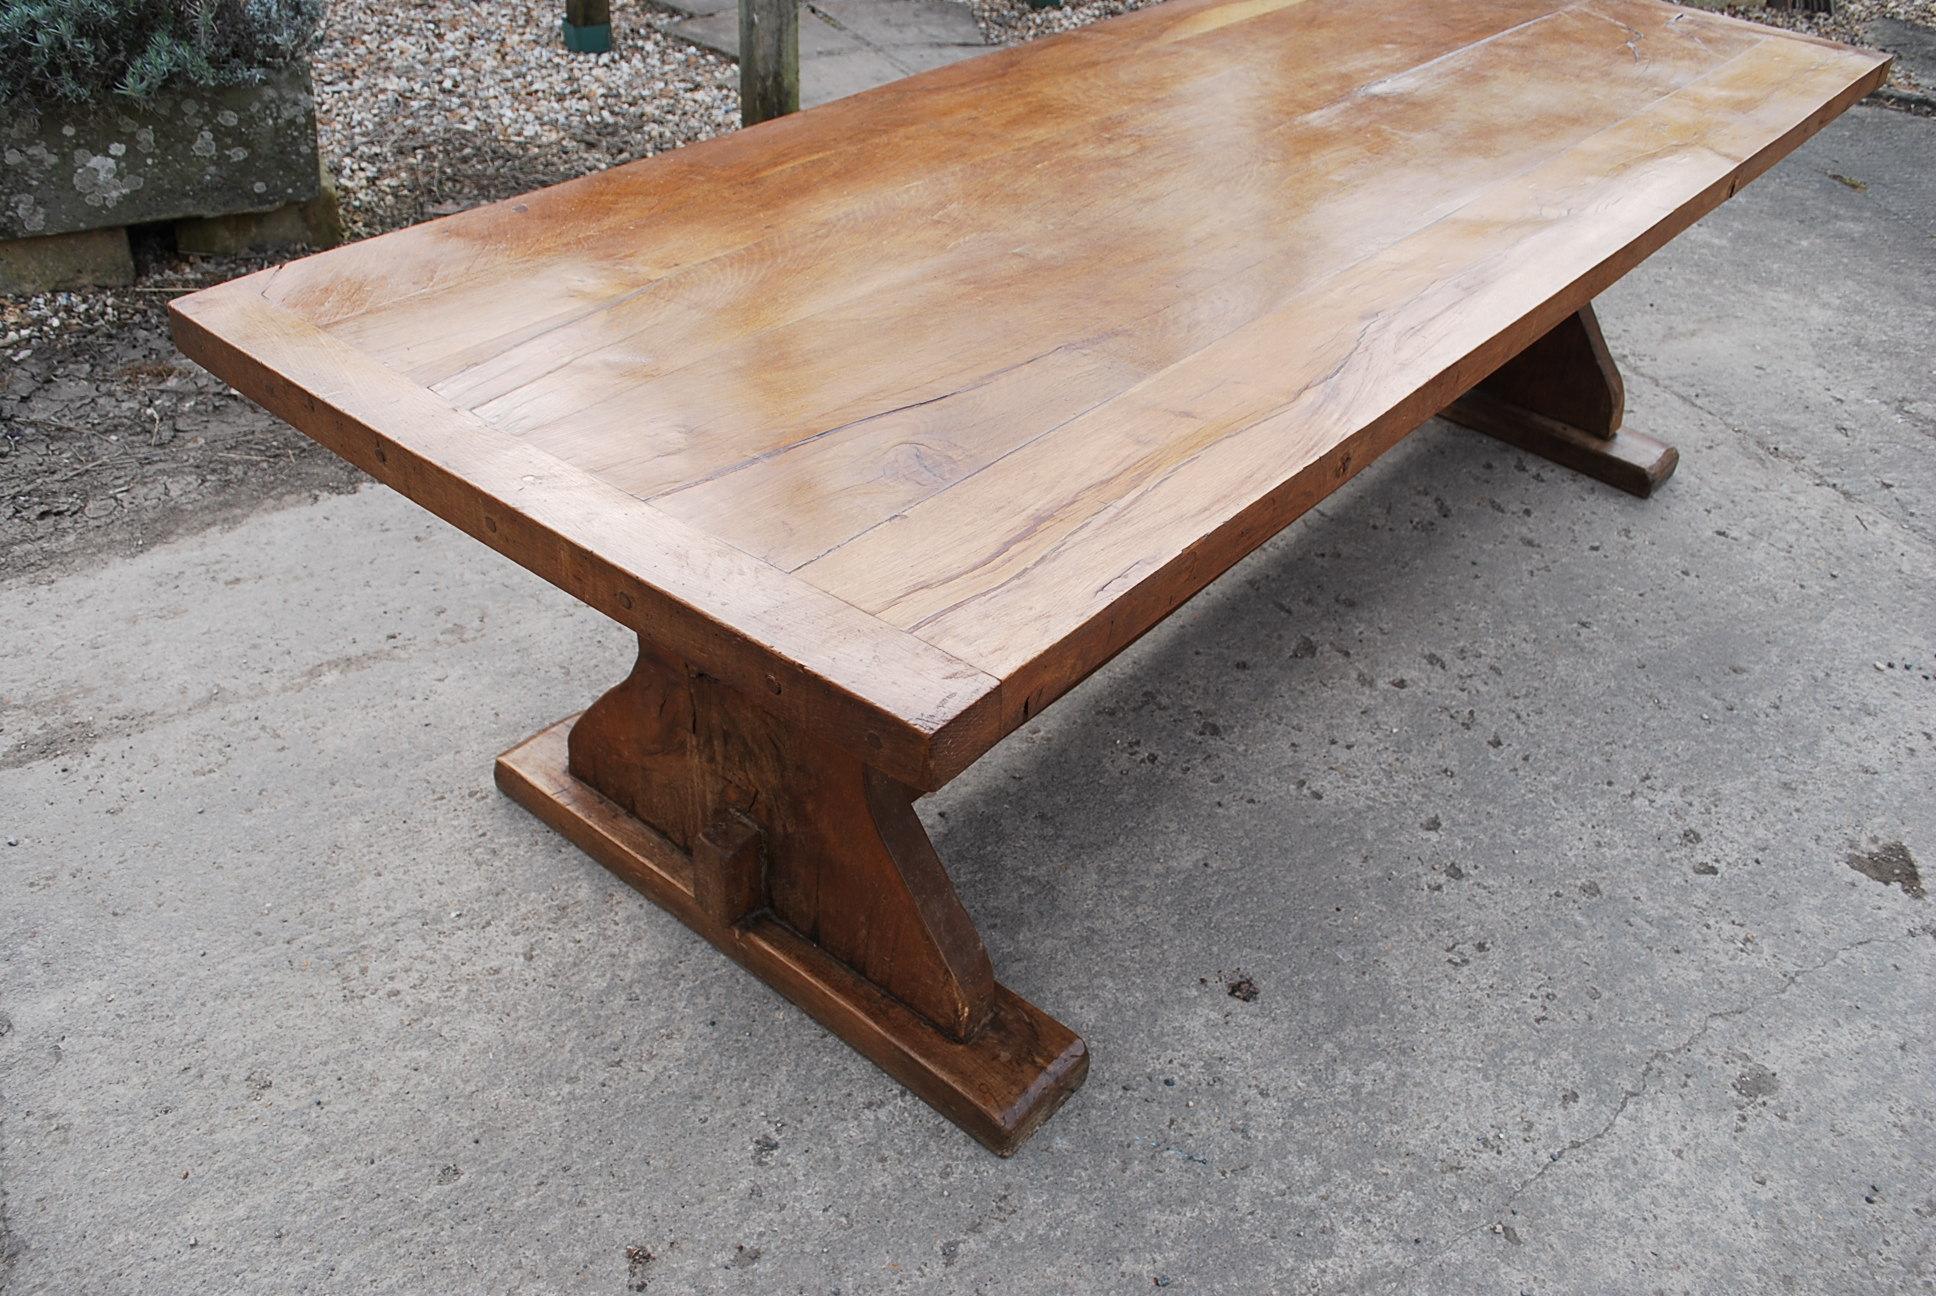 A substantial solid oak French farmhouse table of good bold proportions. Standing on solid shaped trestle ends with a low stretcher. The top is bookmatched oak boards with breadboard ends. There is a slight twist which adds to its character. Good